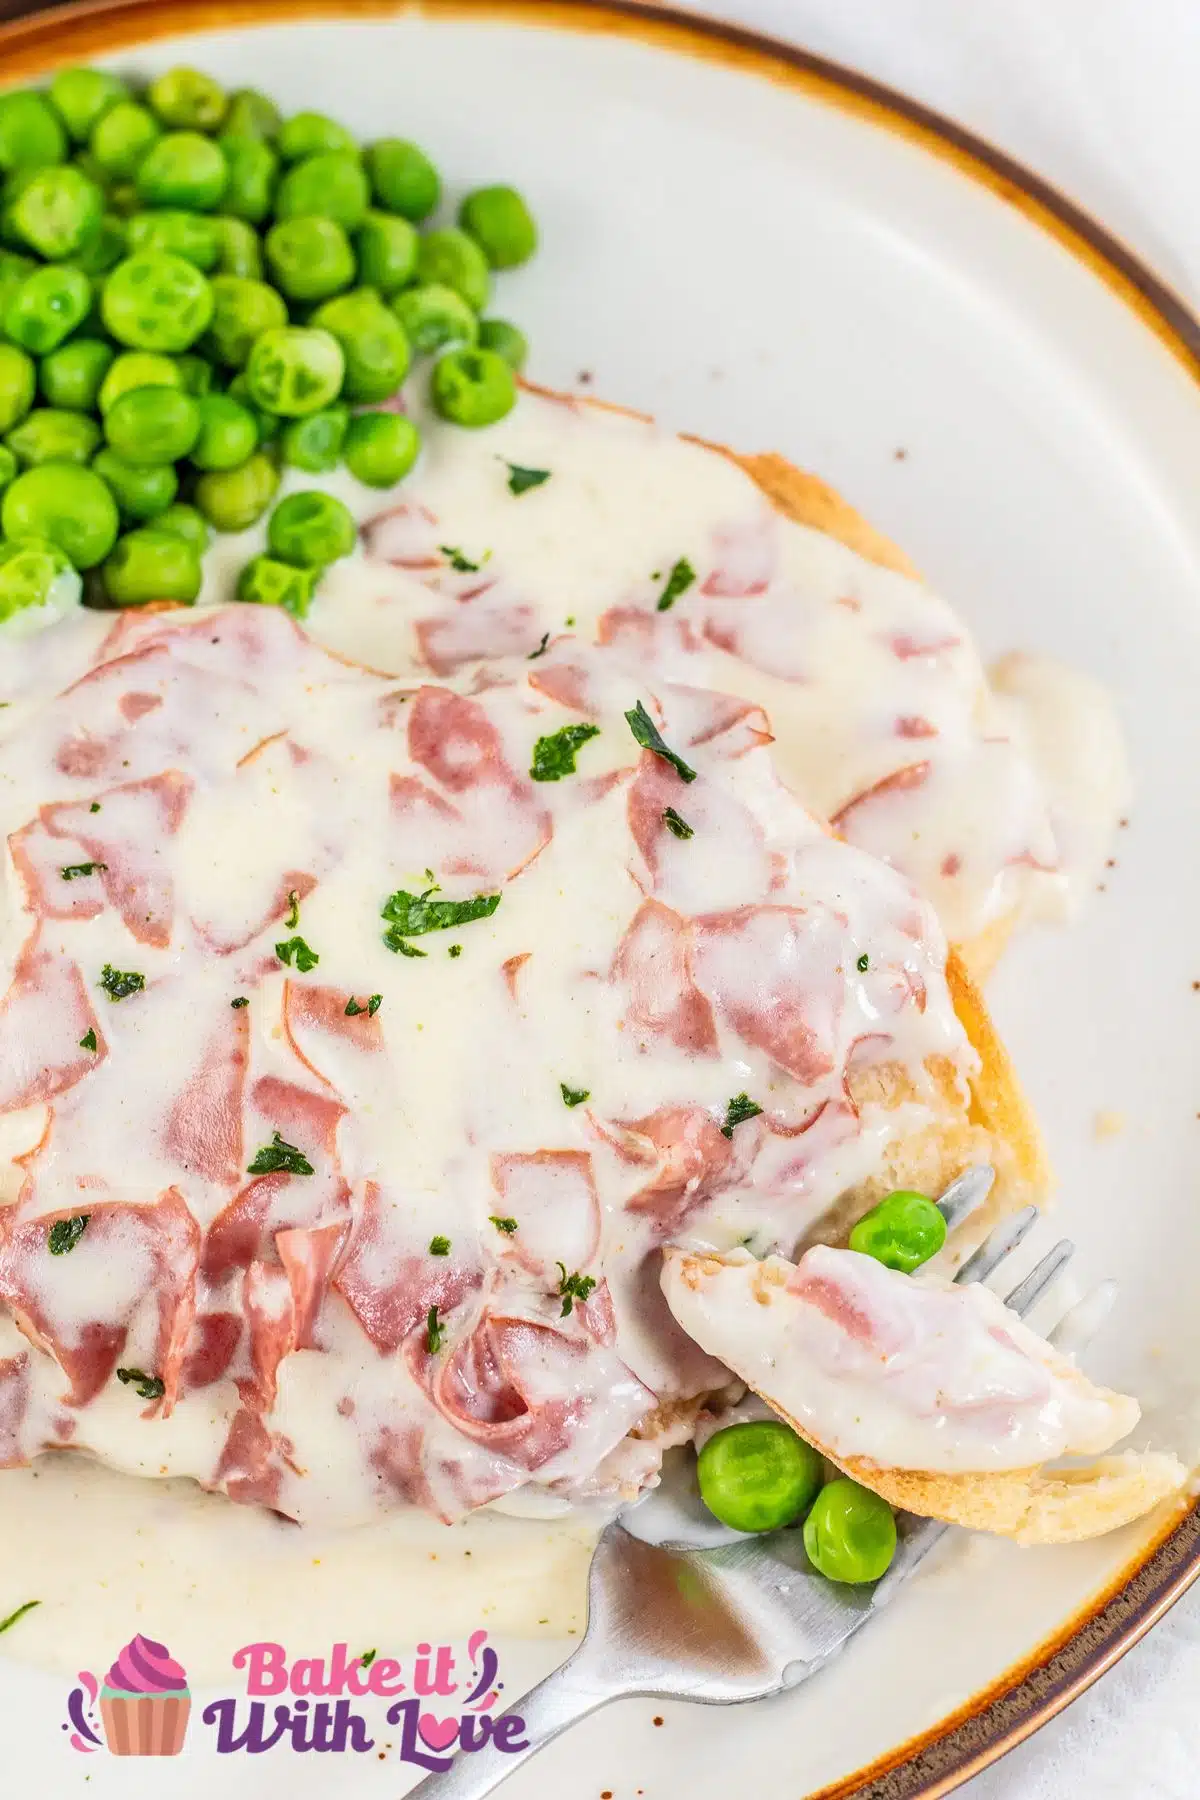 Creamed chipped beef on toast served with peas and a bite forked to the side.